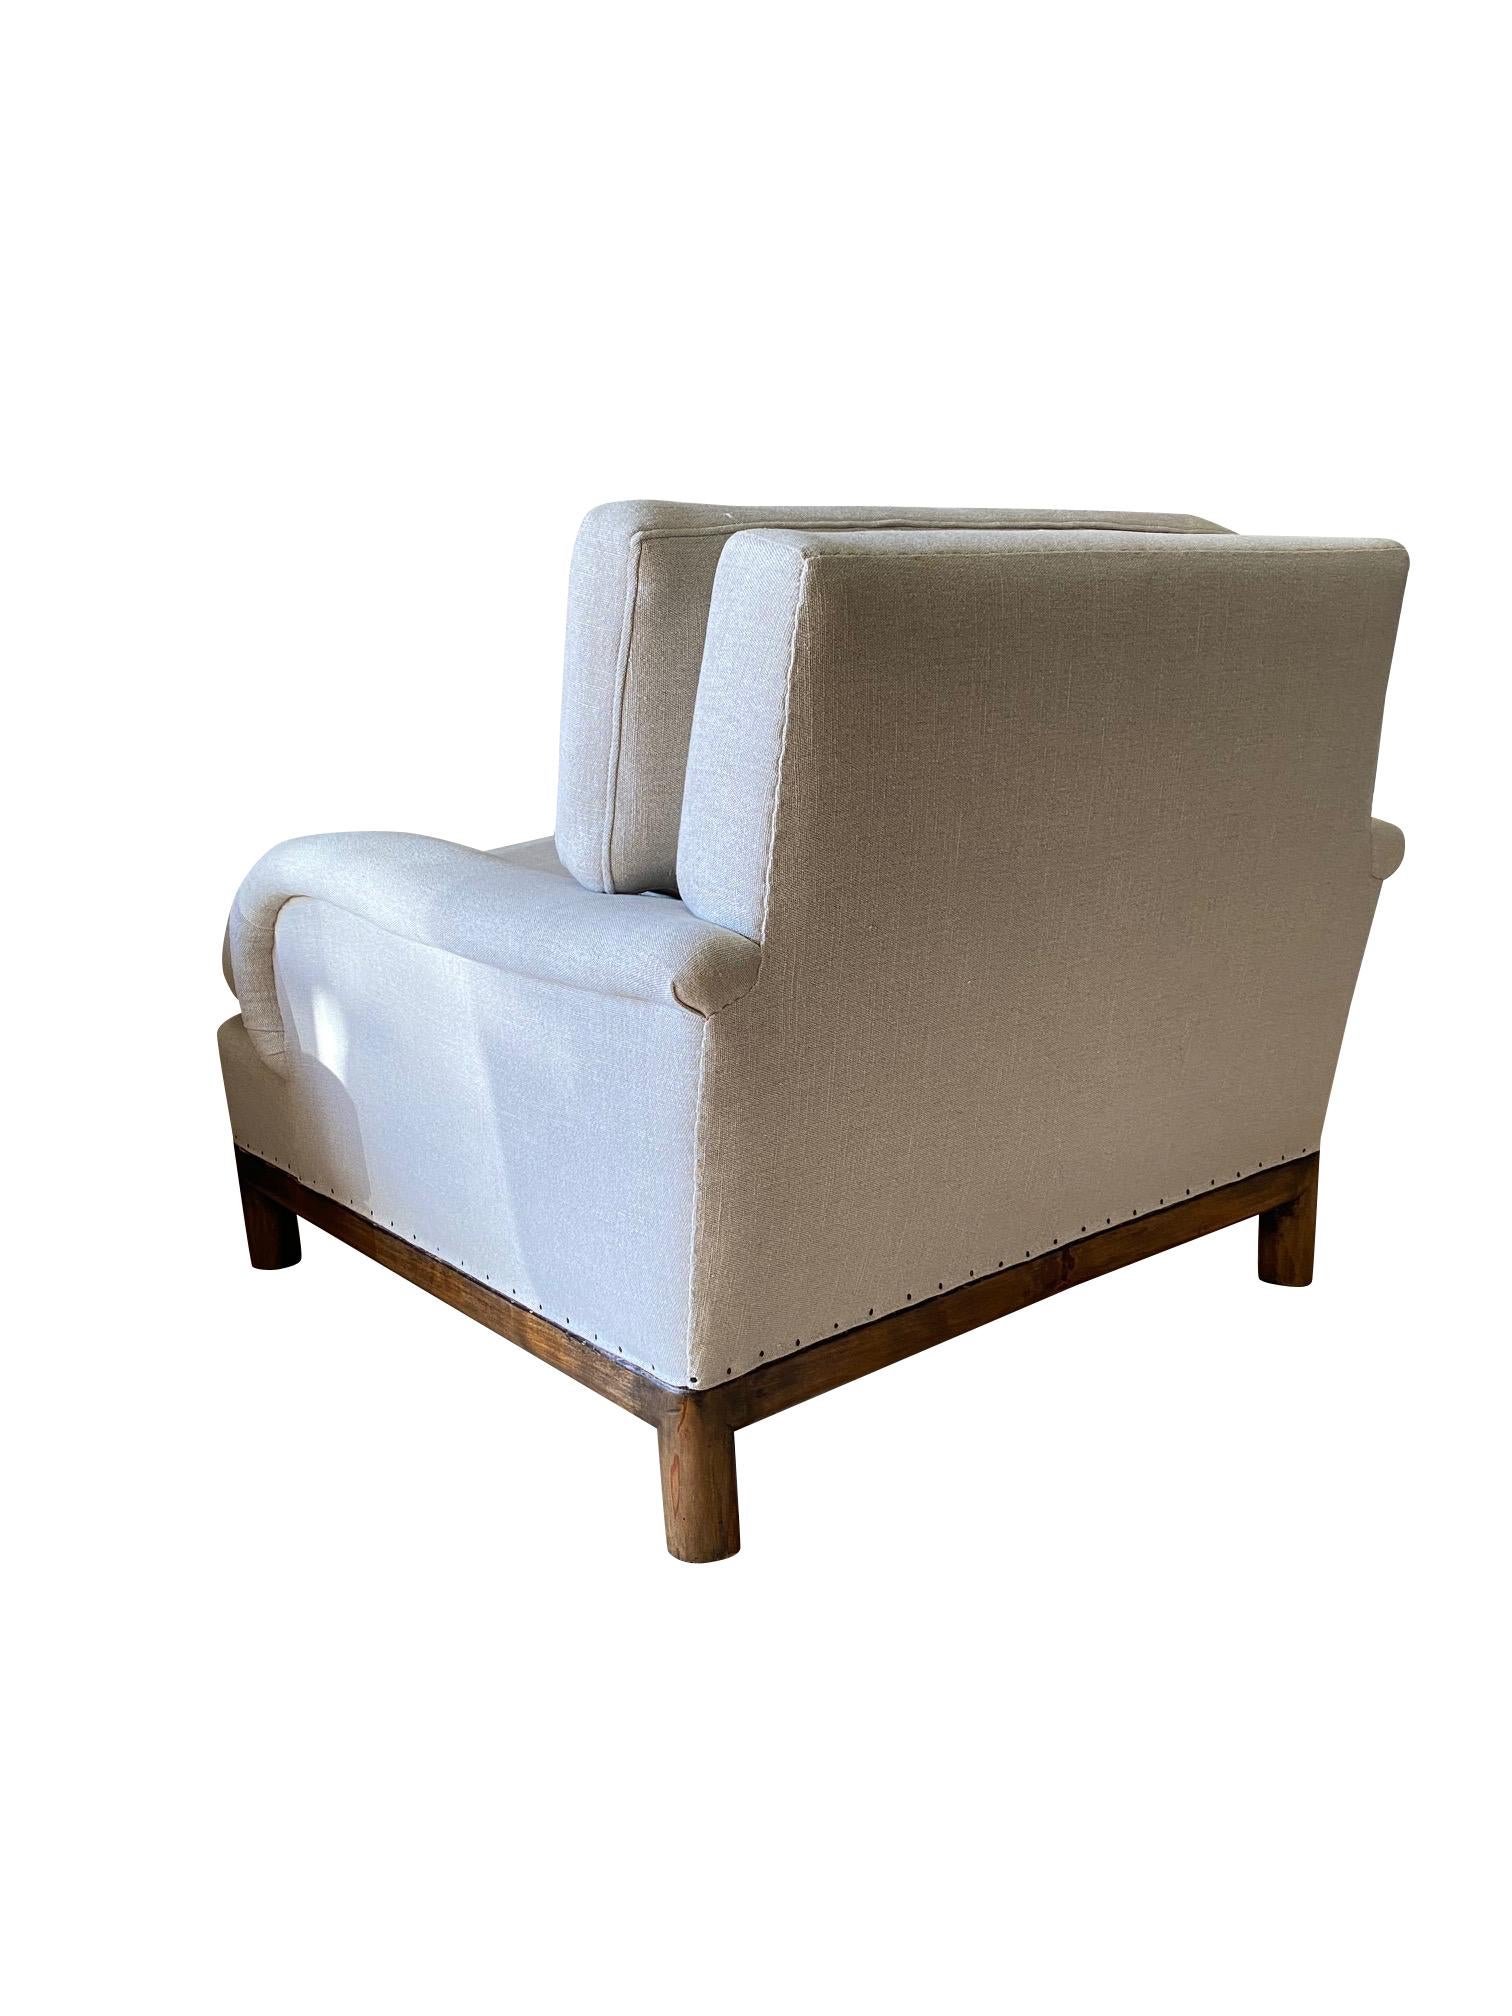 1940s English pair of very comfortable club chairs are attributed to Robsjohn-Gibbings.
Terence Harold Robsjohn-Gibbings was a British born architect turned decorator.  His designs are known for a mixture of classic Greek and Art Deco.
These chairs